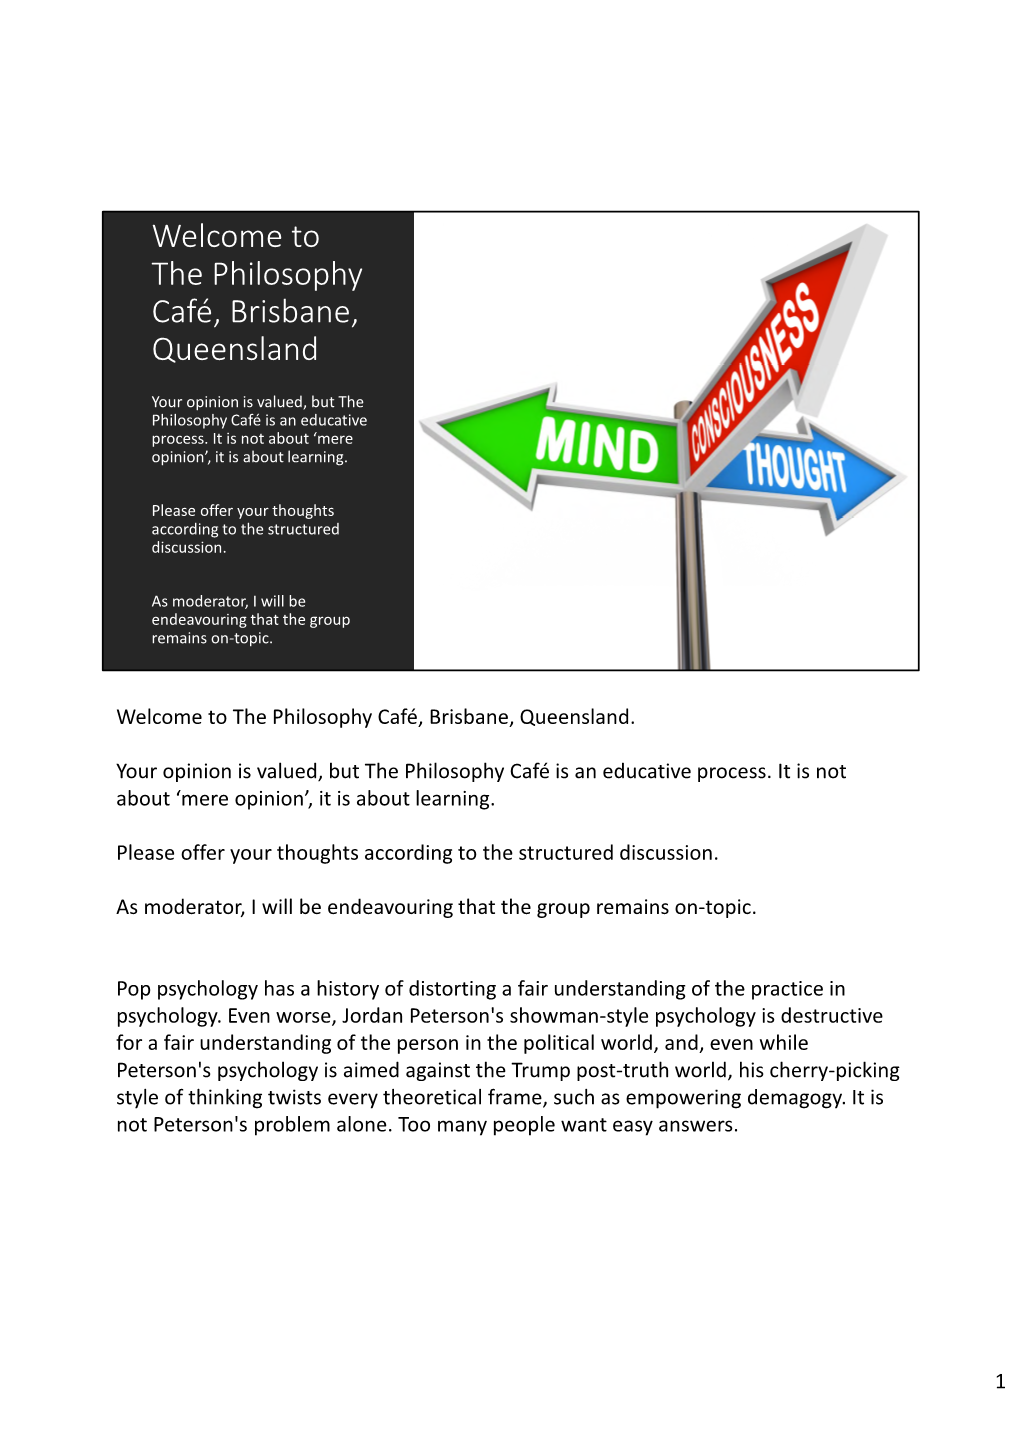 Welcome to the Philosophy Café, Brisbane, Queensland